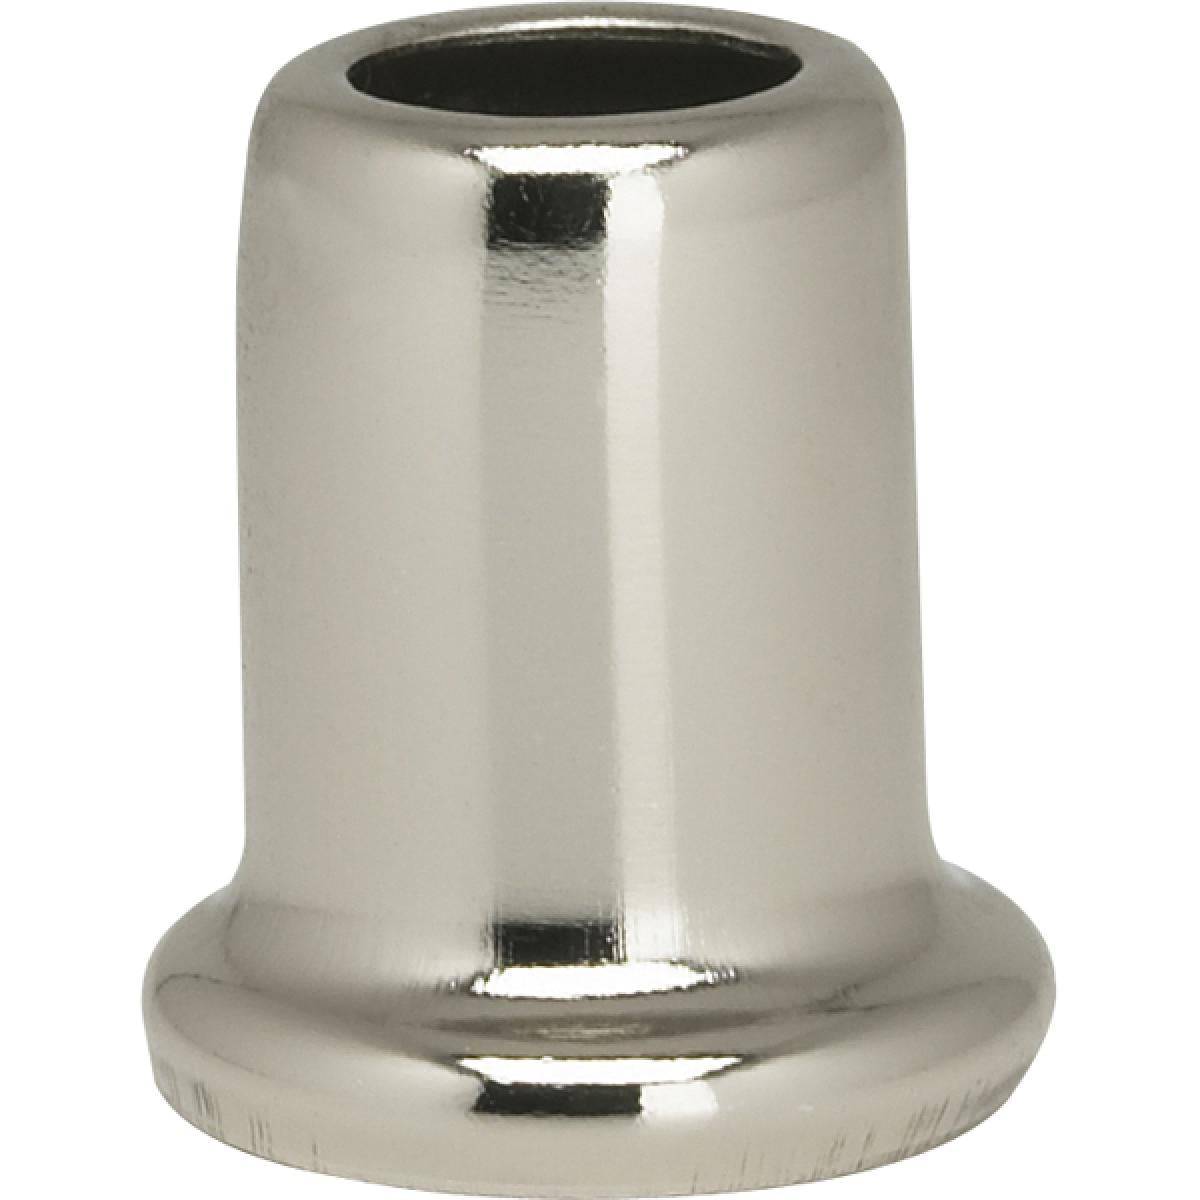 Satco 90-2214 Flanged Steel Neck 1" Height 7/8" Bottom Nickel Plated Finish